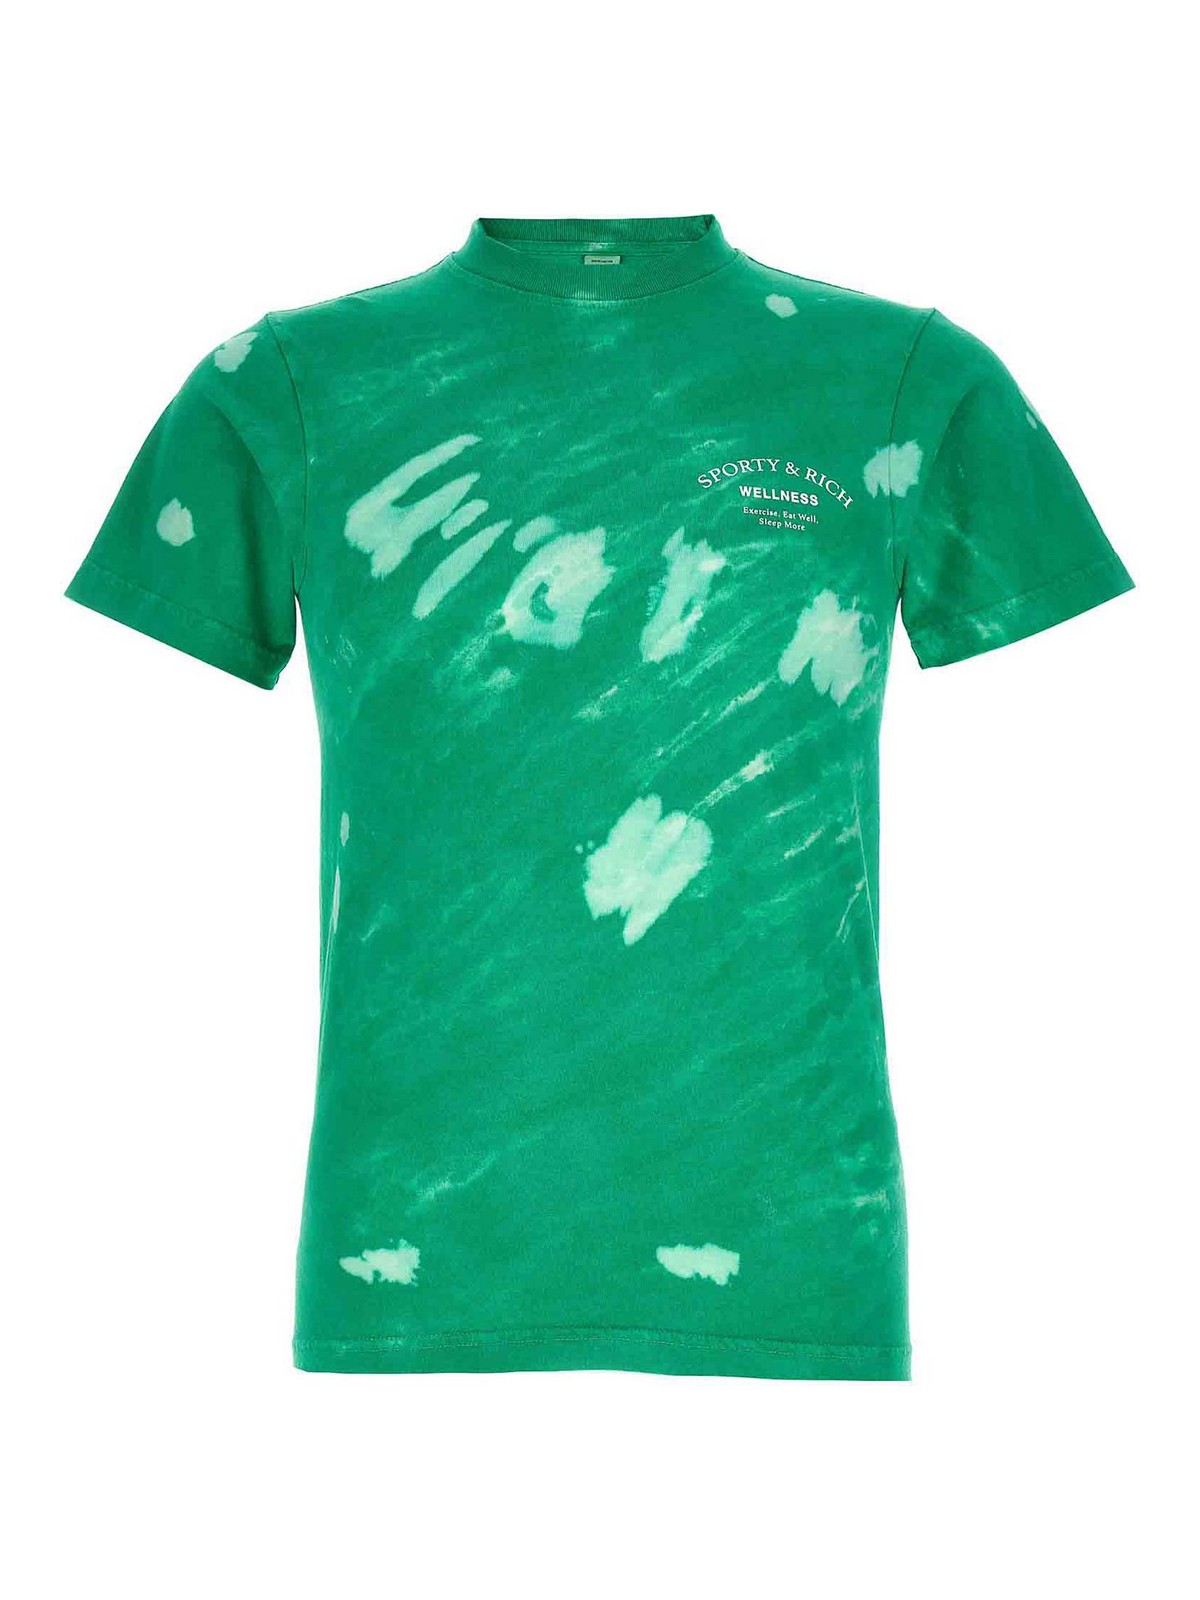 Sporty And Rich Wellness Studio T-shirt In Green